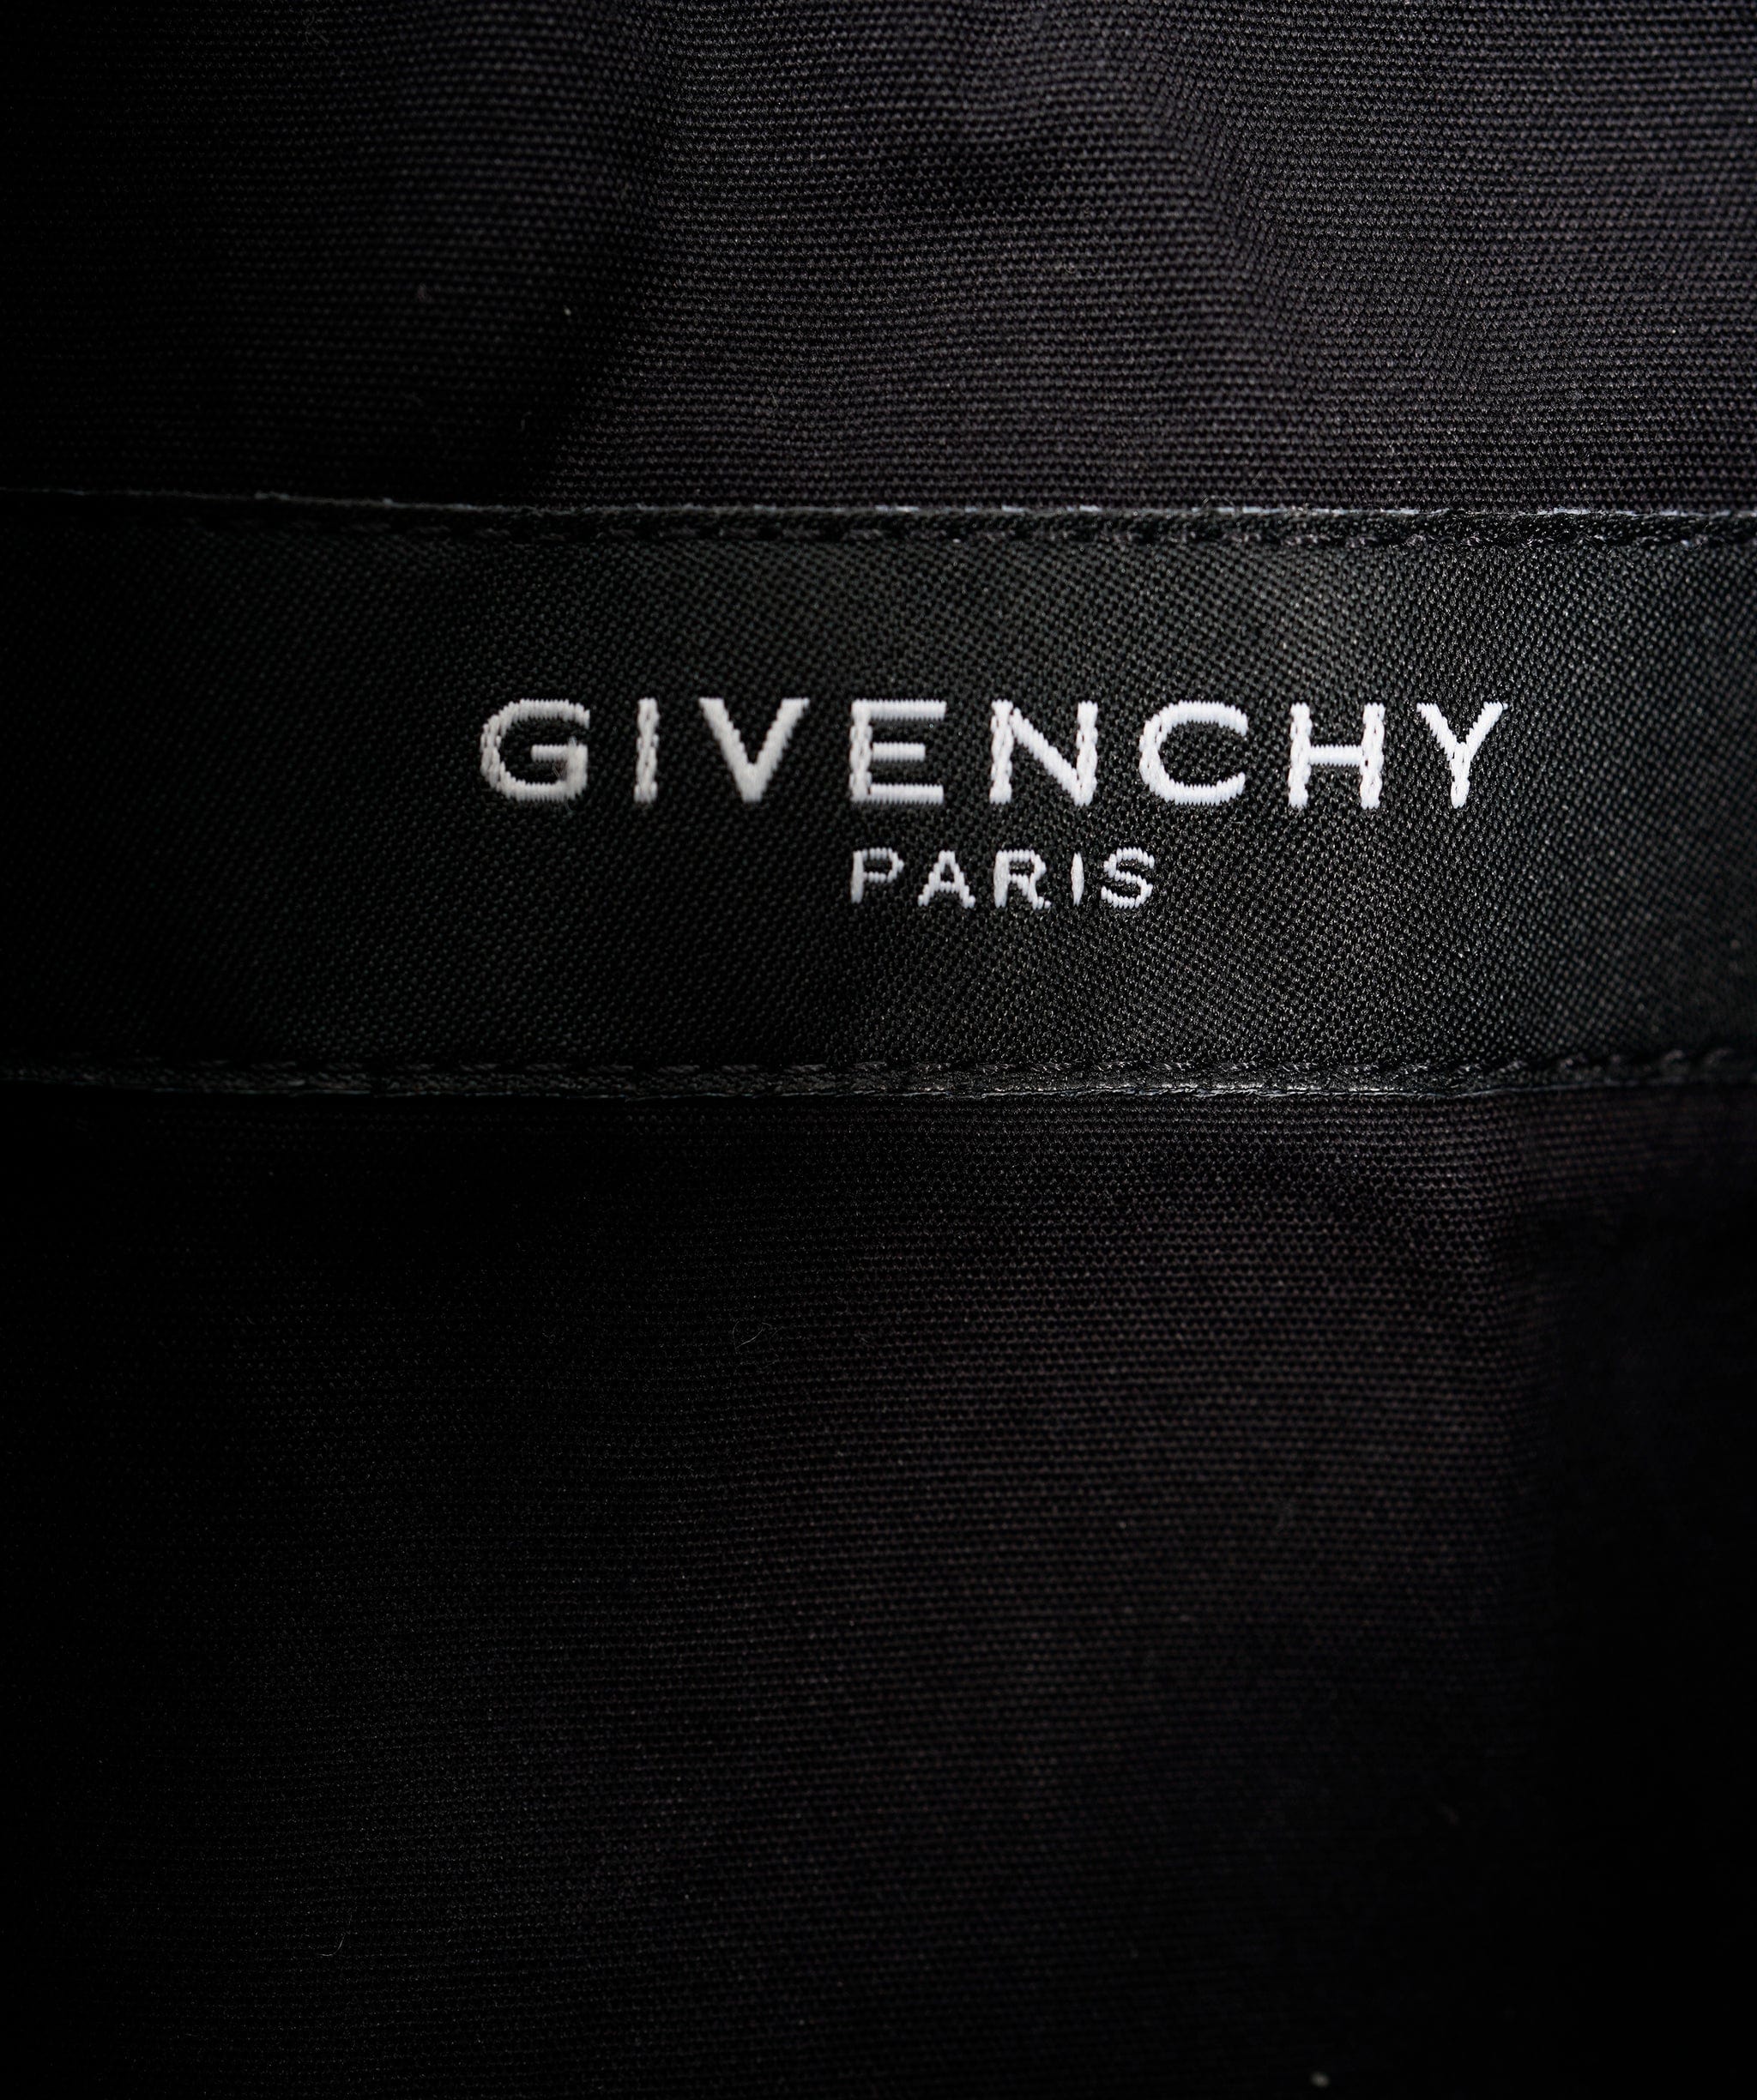 Givenchy Givenchy Black Shirt Leather collar size 41 AGC1653